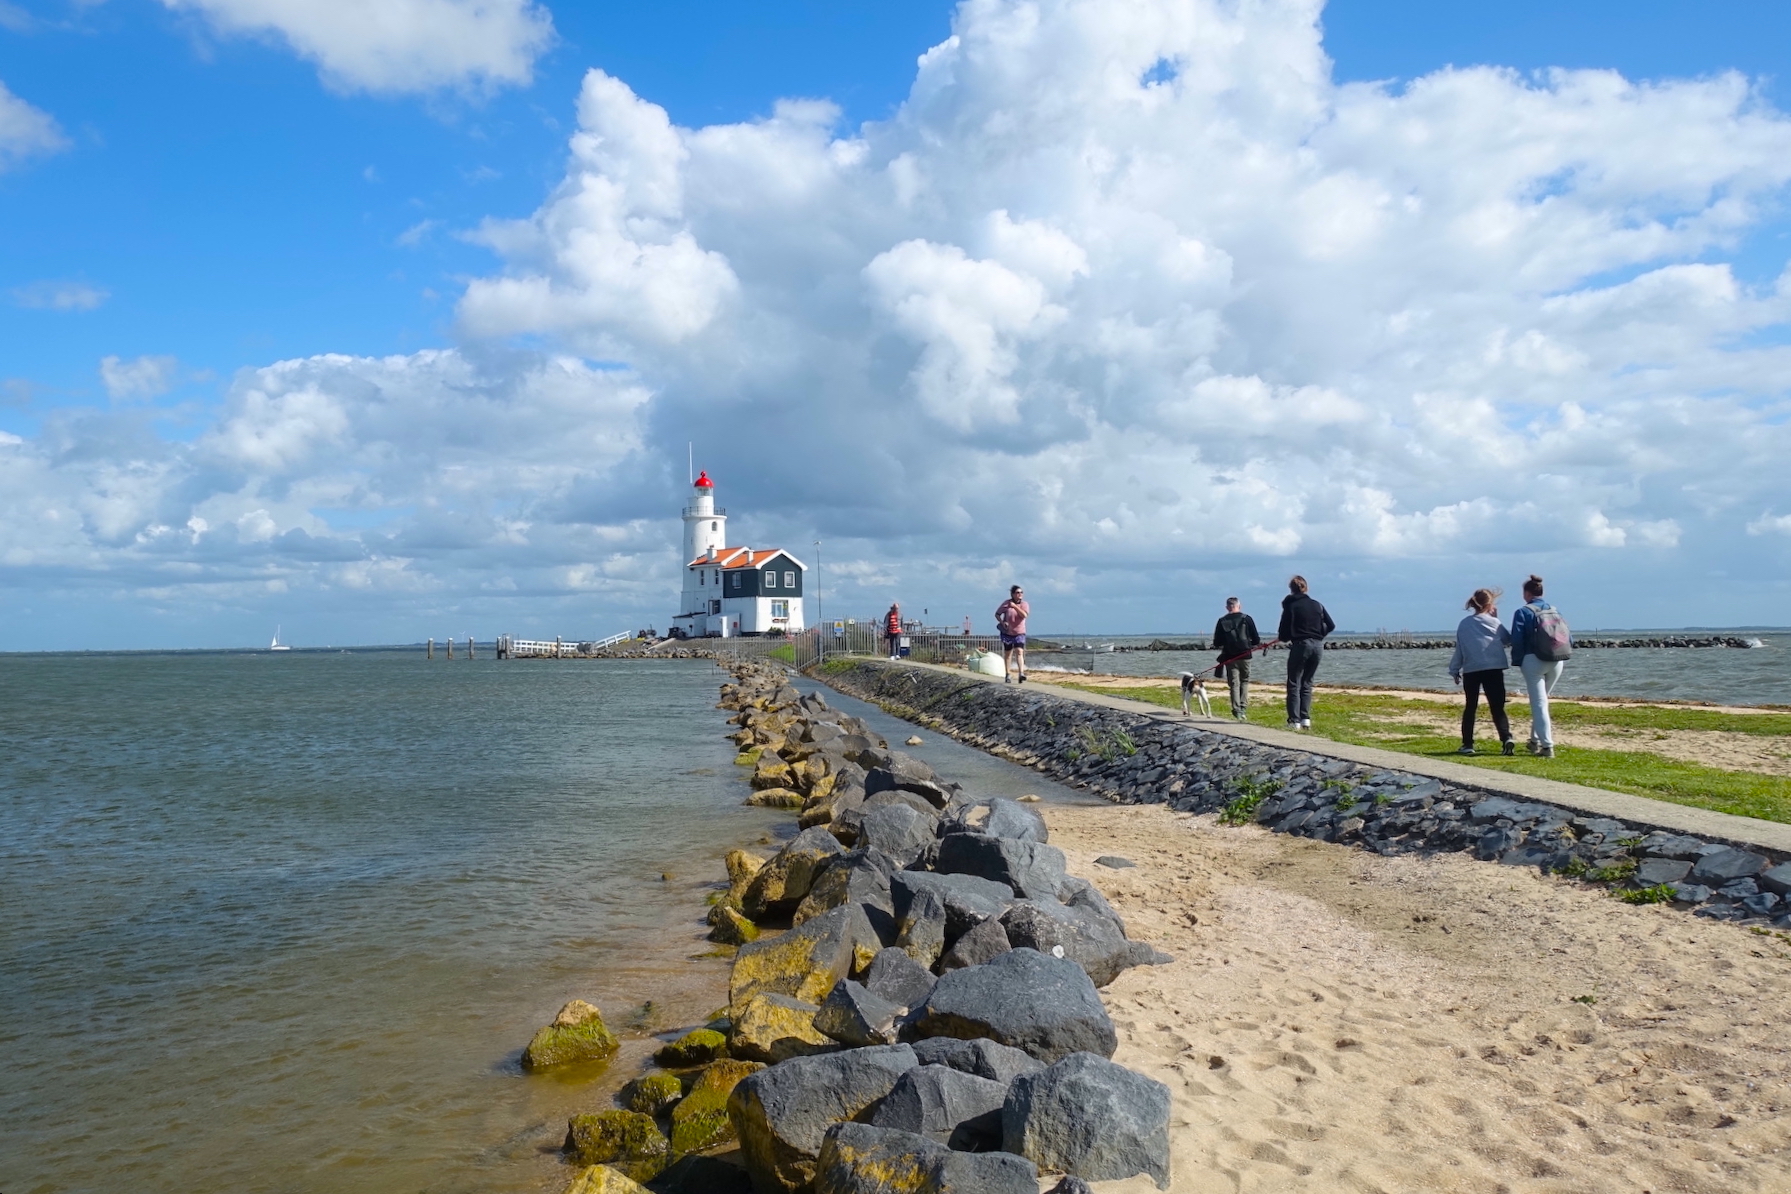 A view of Marken beach and the lighthouse in the Amsterdam rural area